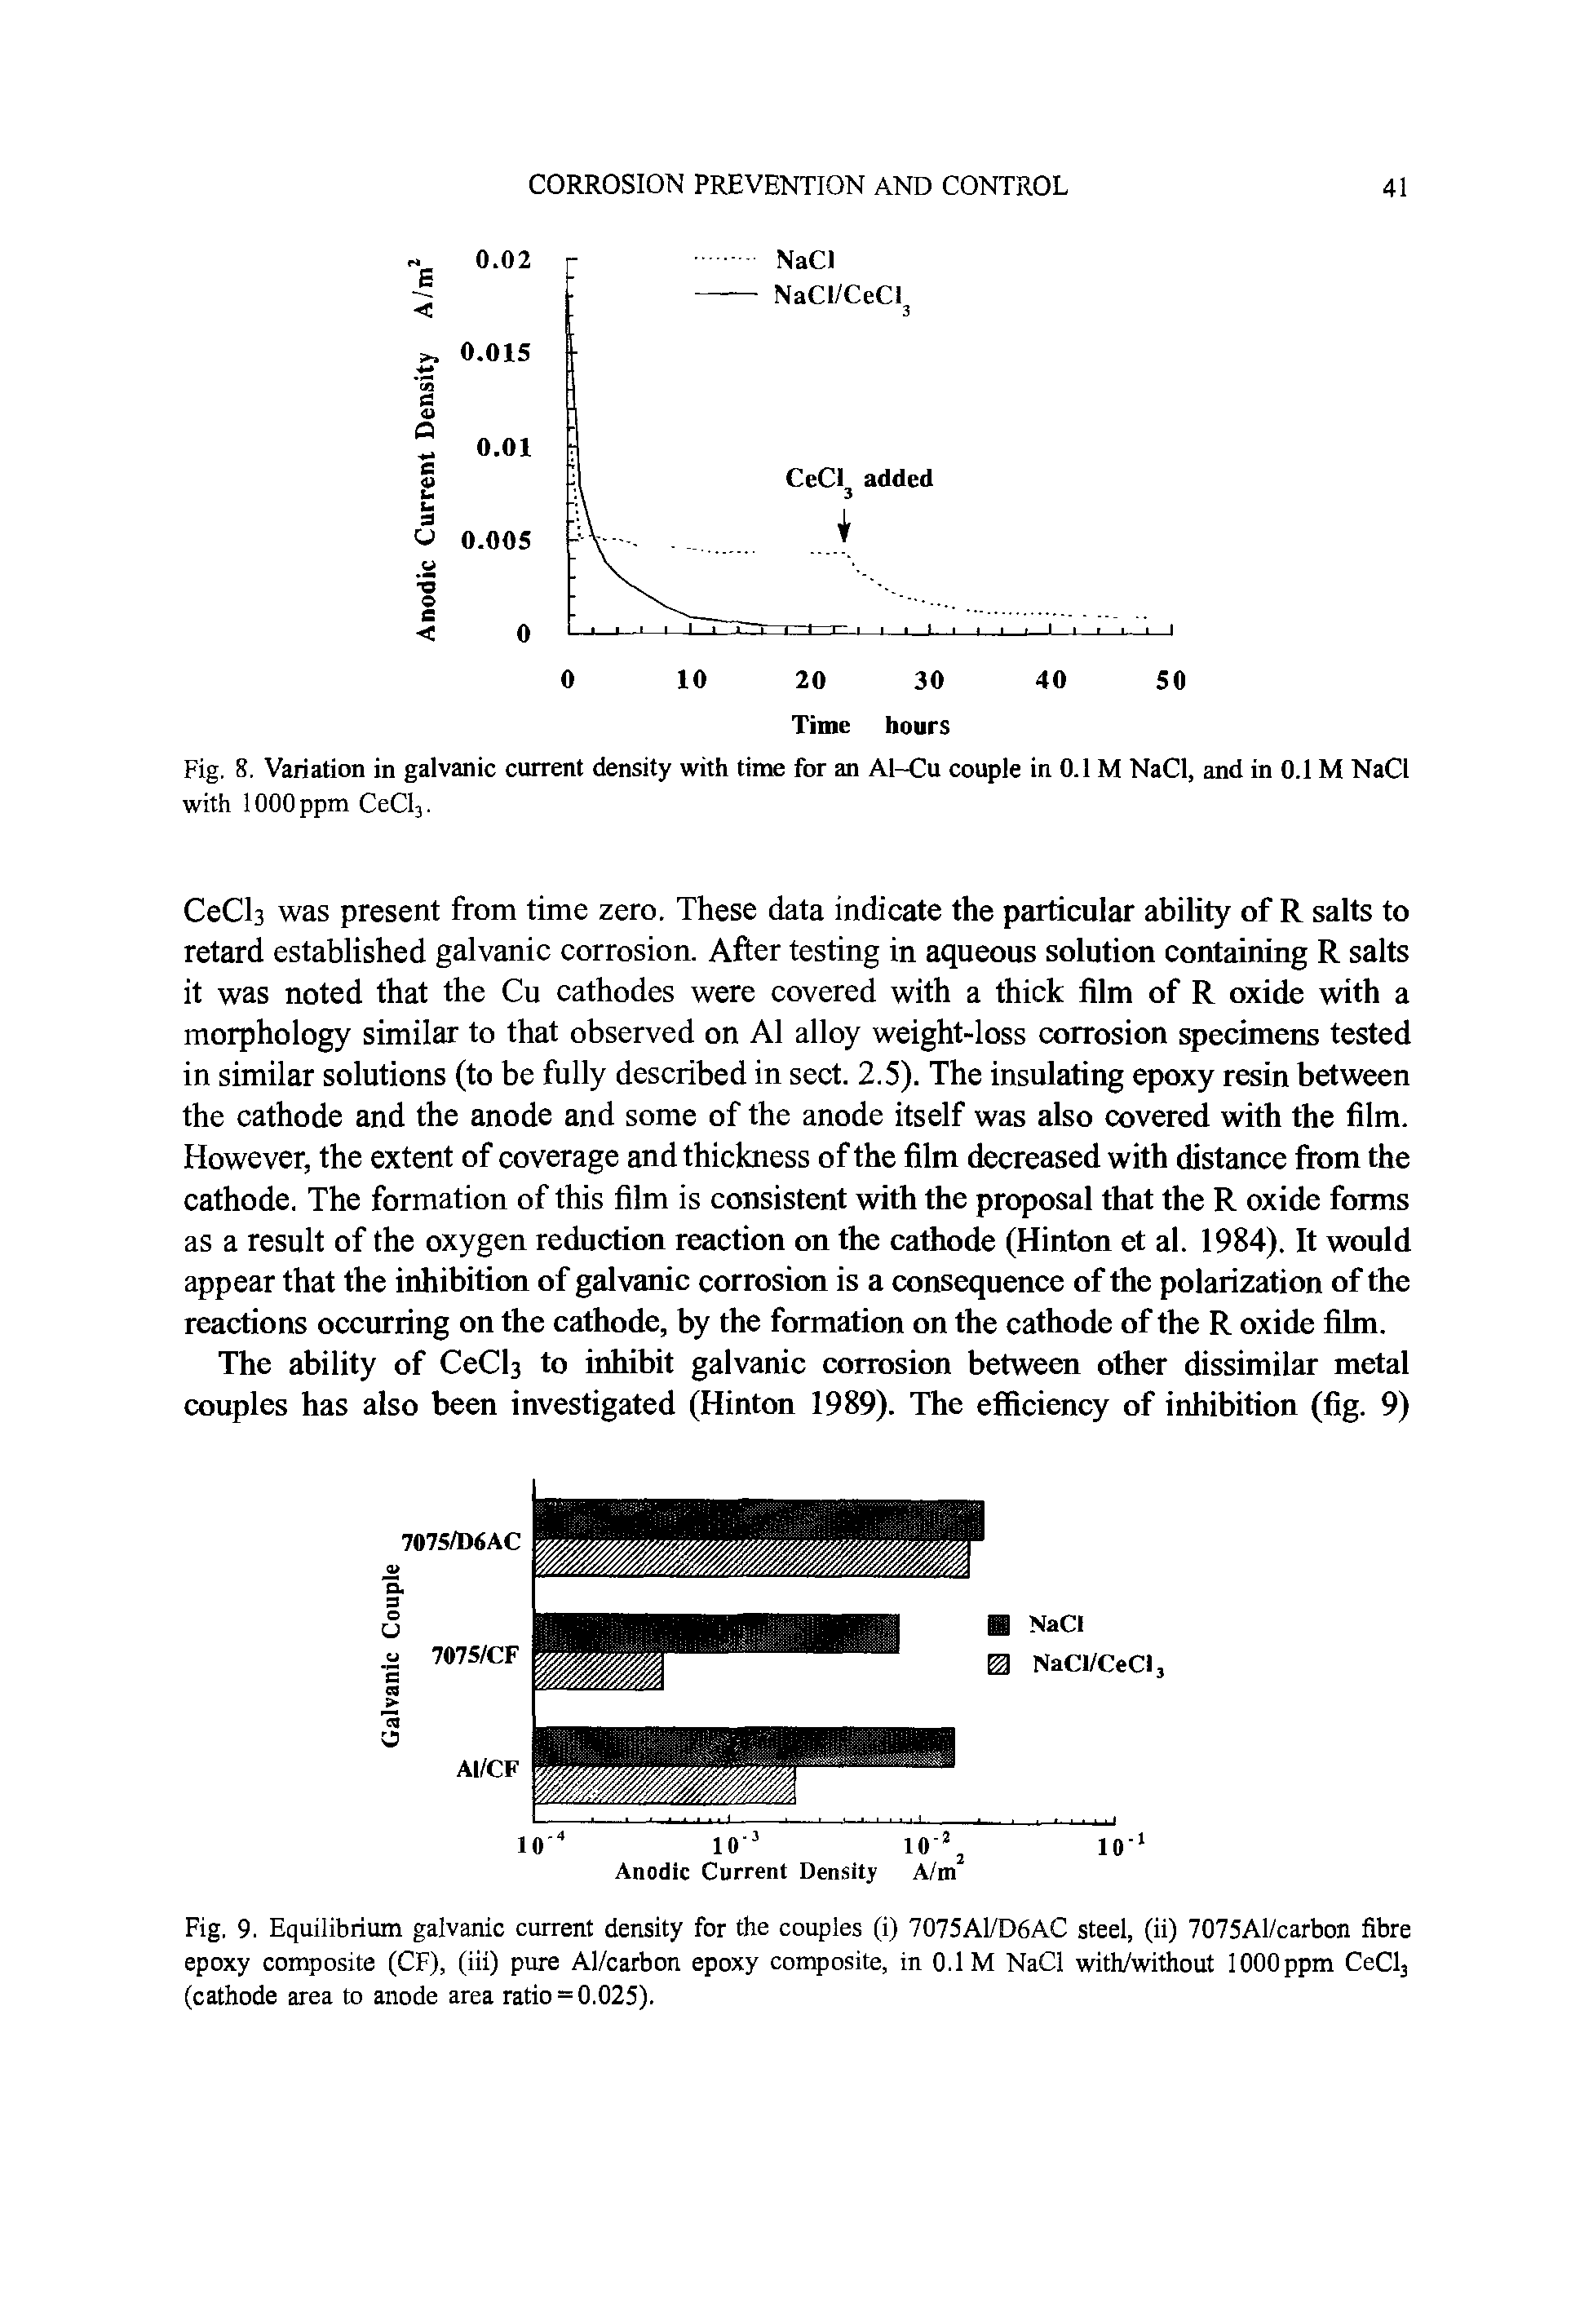 Fig. 9. Equilibrium galvanic current density for the couples (i) 7075A1/D6AC steel, (ii) 7075Al/carbon fibre epoxy composite (CF), (iii) pure Al/carbon epoxy composite, in 0.1 M NaCl with/without lOOOppm CeClj (cathode area to anode area ratio = 0.025).